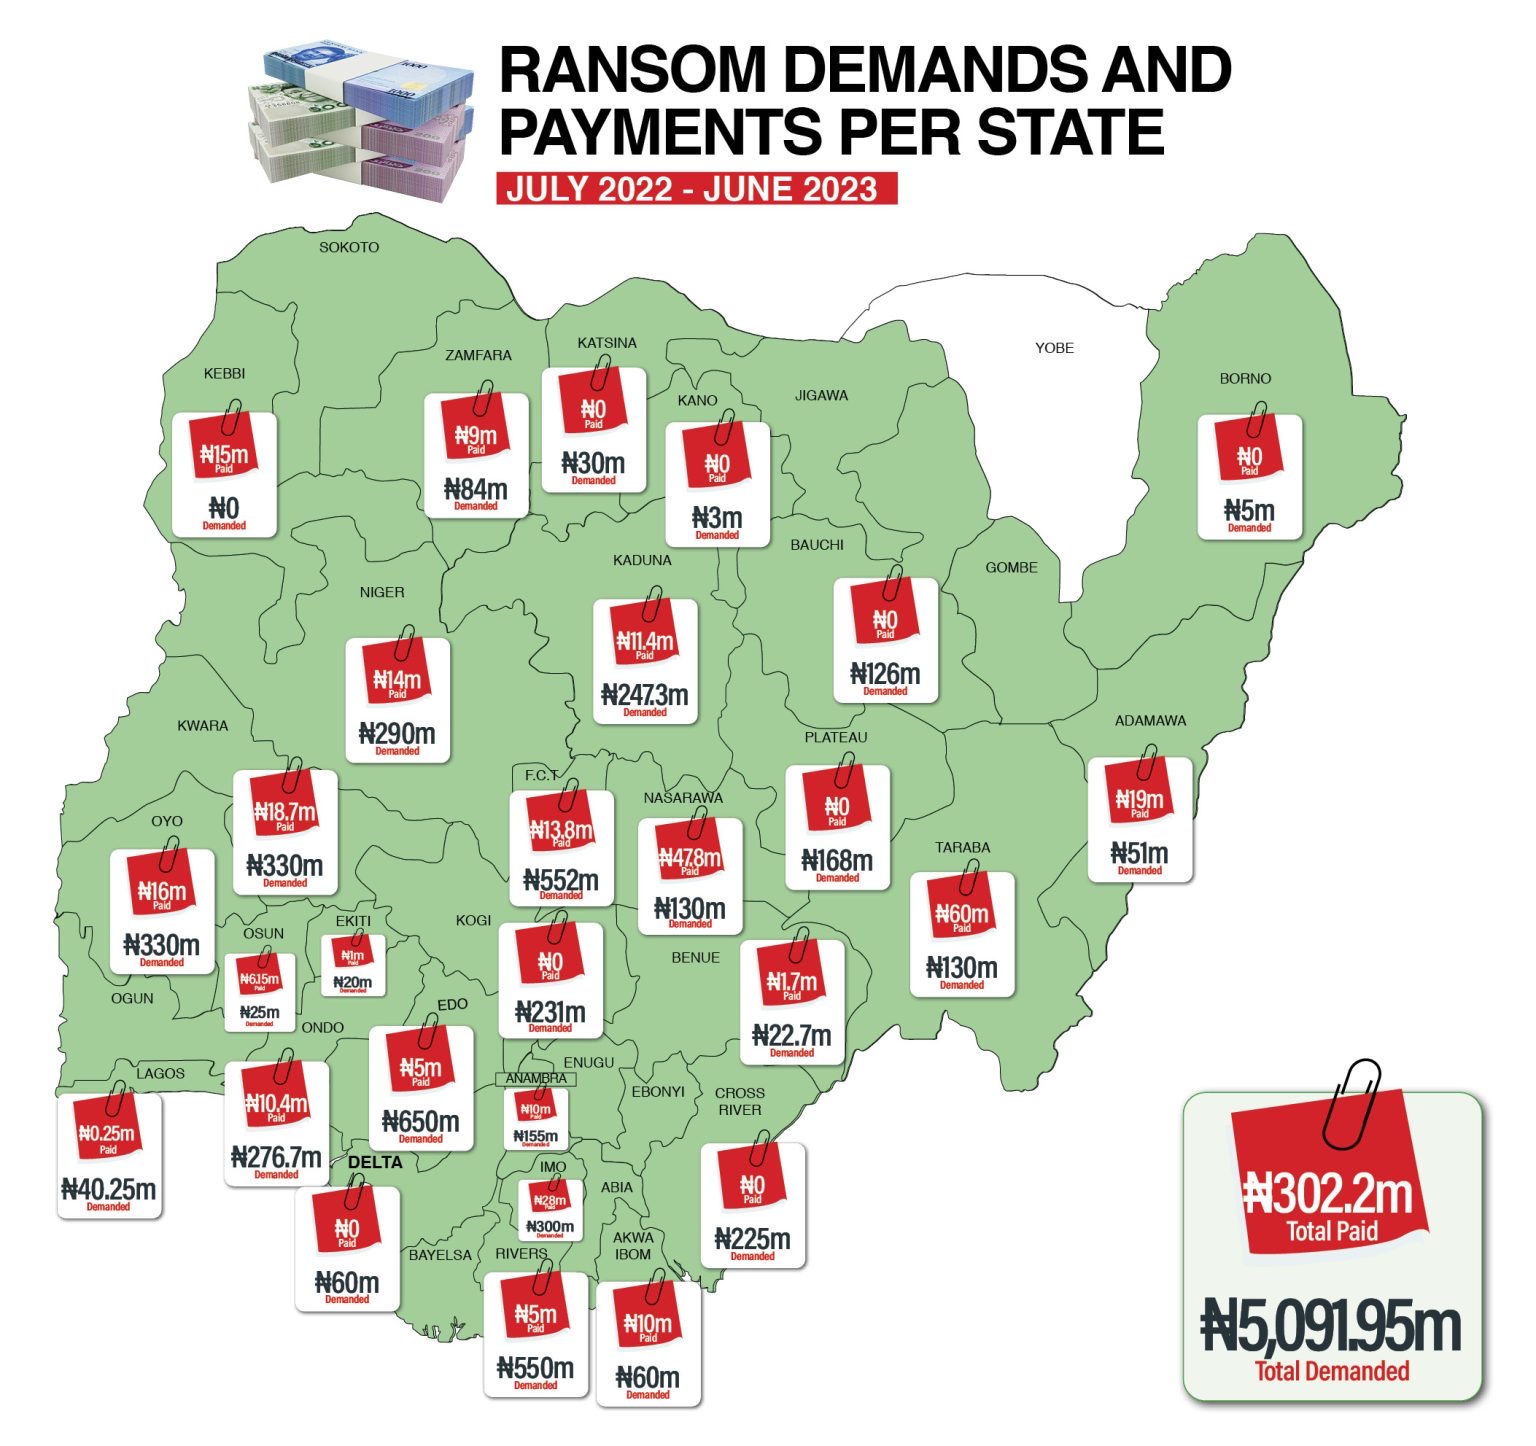 NIgeria's ransom demands and payments per State